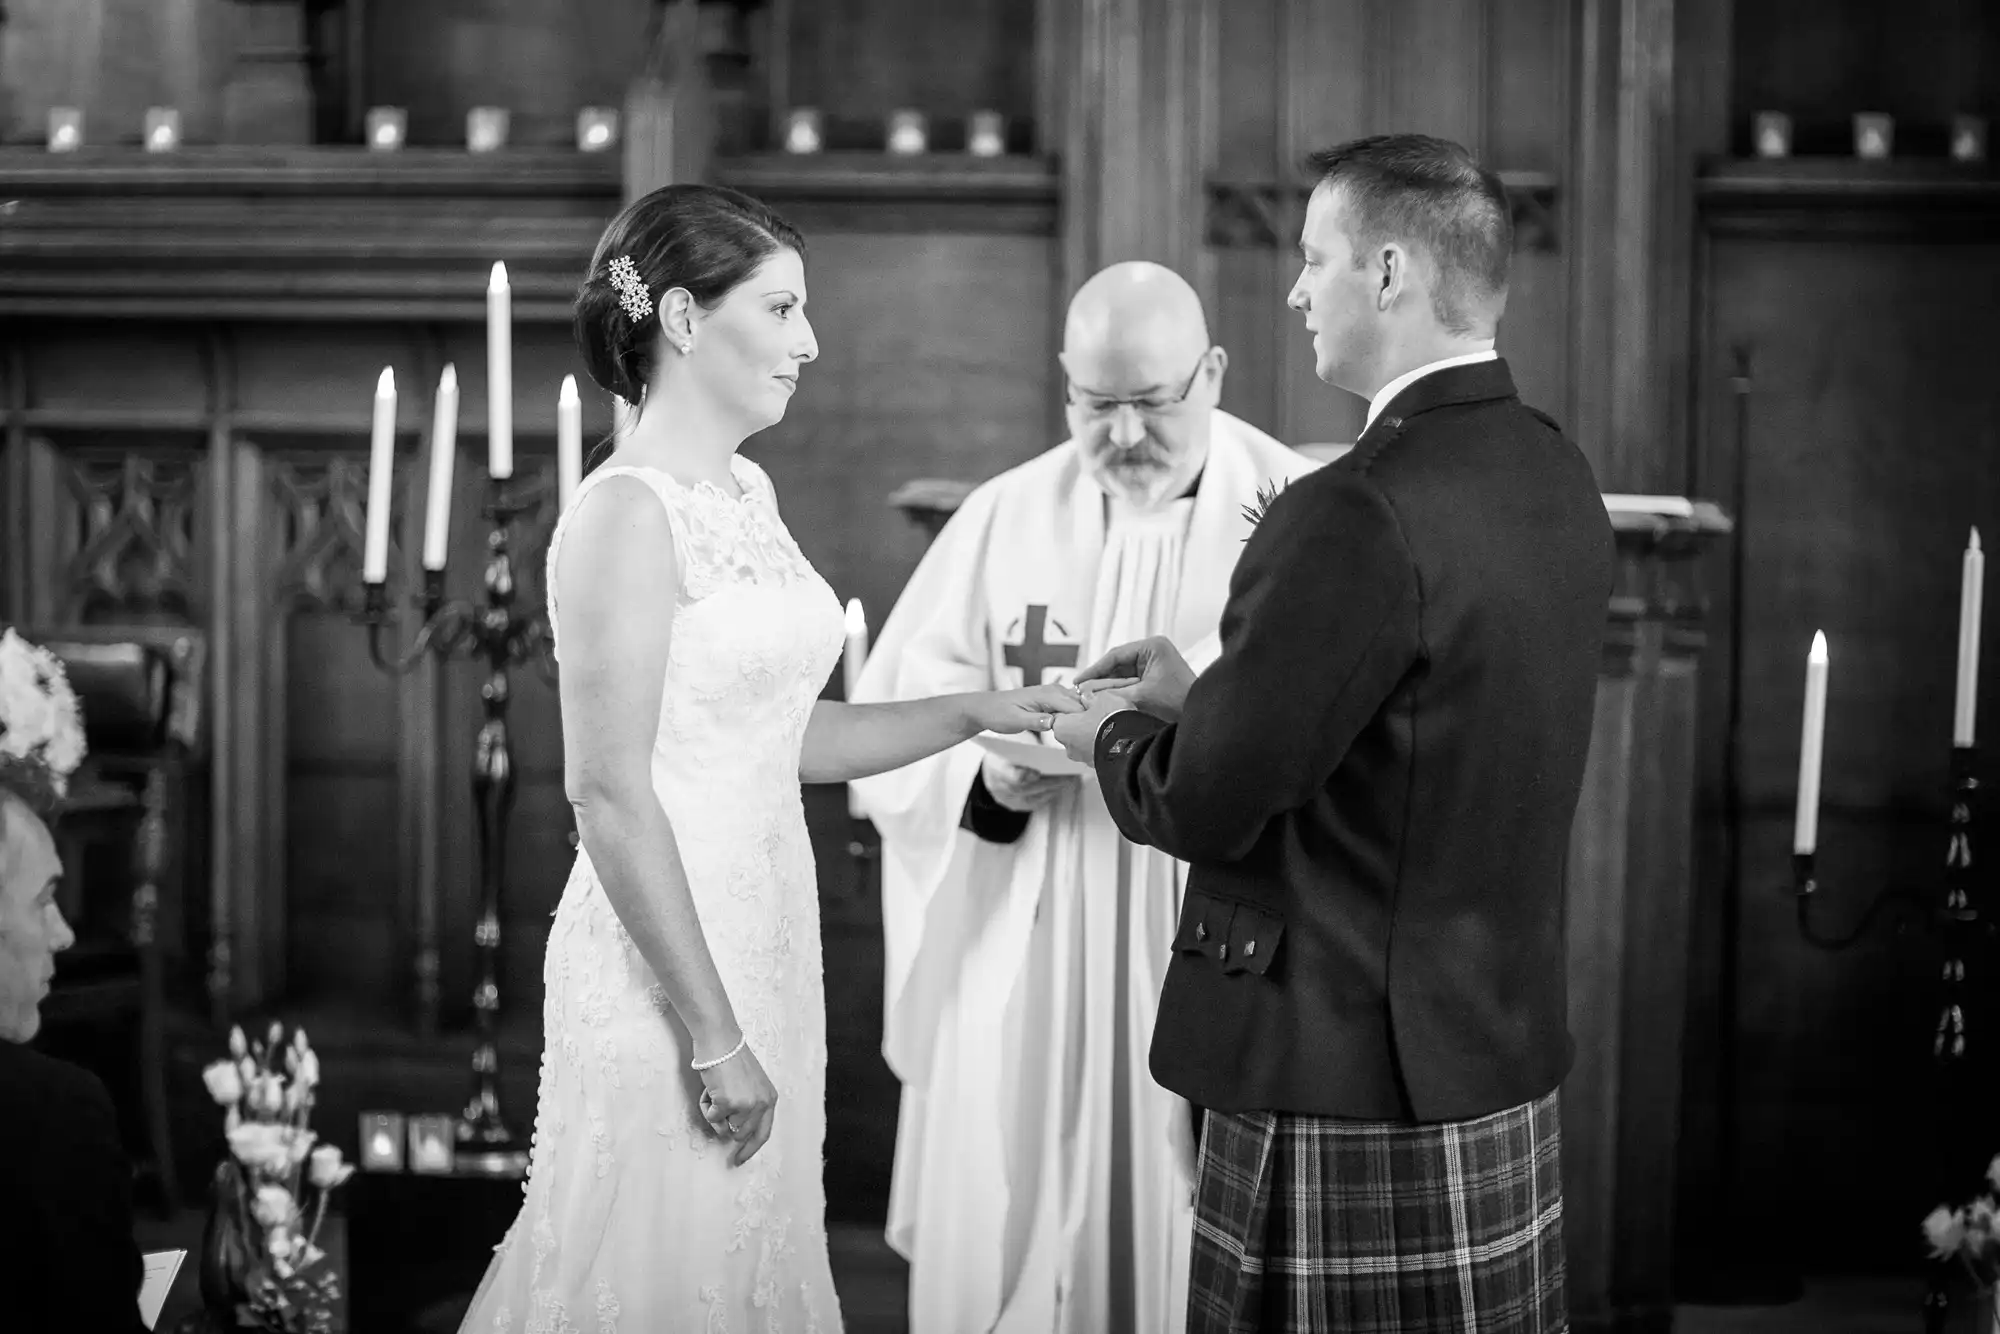 A bride in a white dress and a groom in a kilt exchange rings during a wedding ceremony in a church, officiated by a priest.